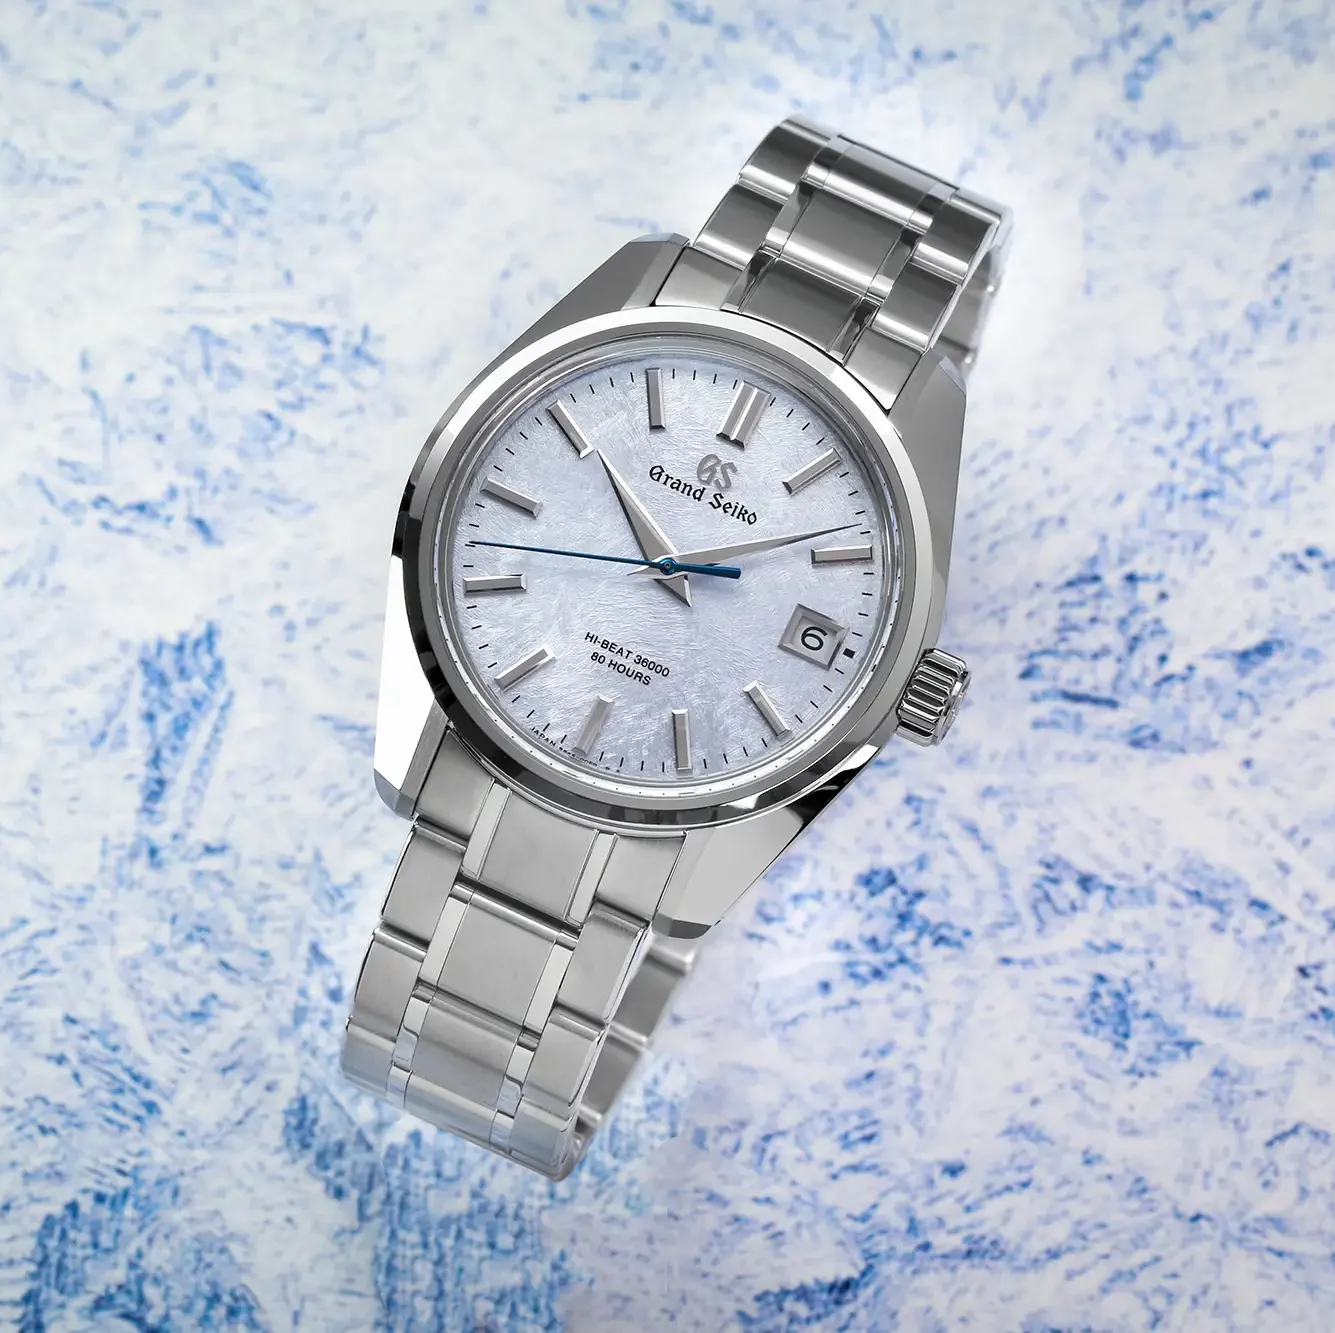 The new Grand Seiko SLGH013 means the 9SA5 x 44GS case combo has arrived in standard production